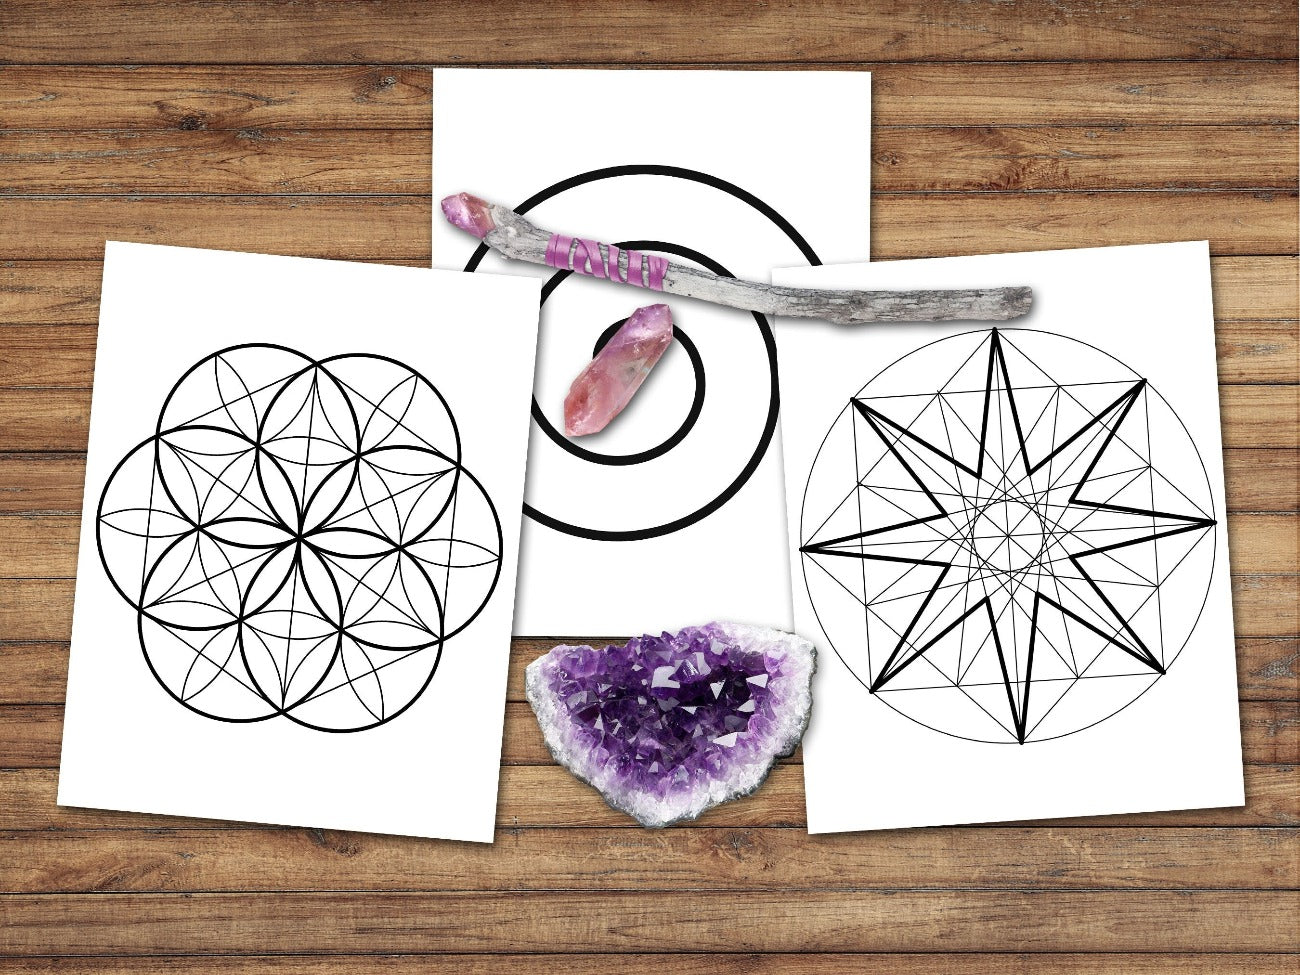 Three crystal grid templates, flower or life, star, and spiral sacred geometry shapes - Morgana Magick Spell